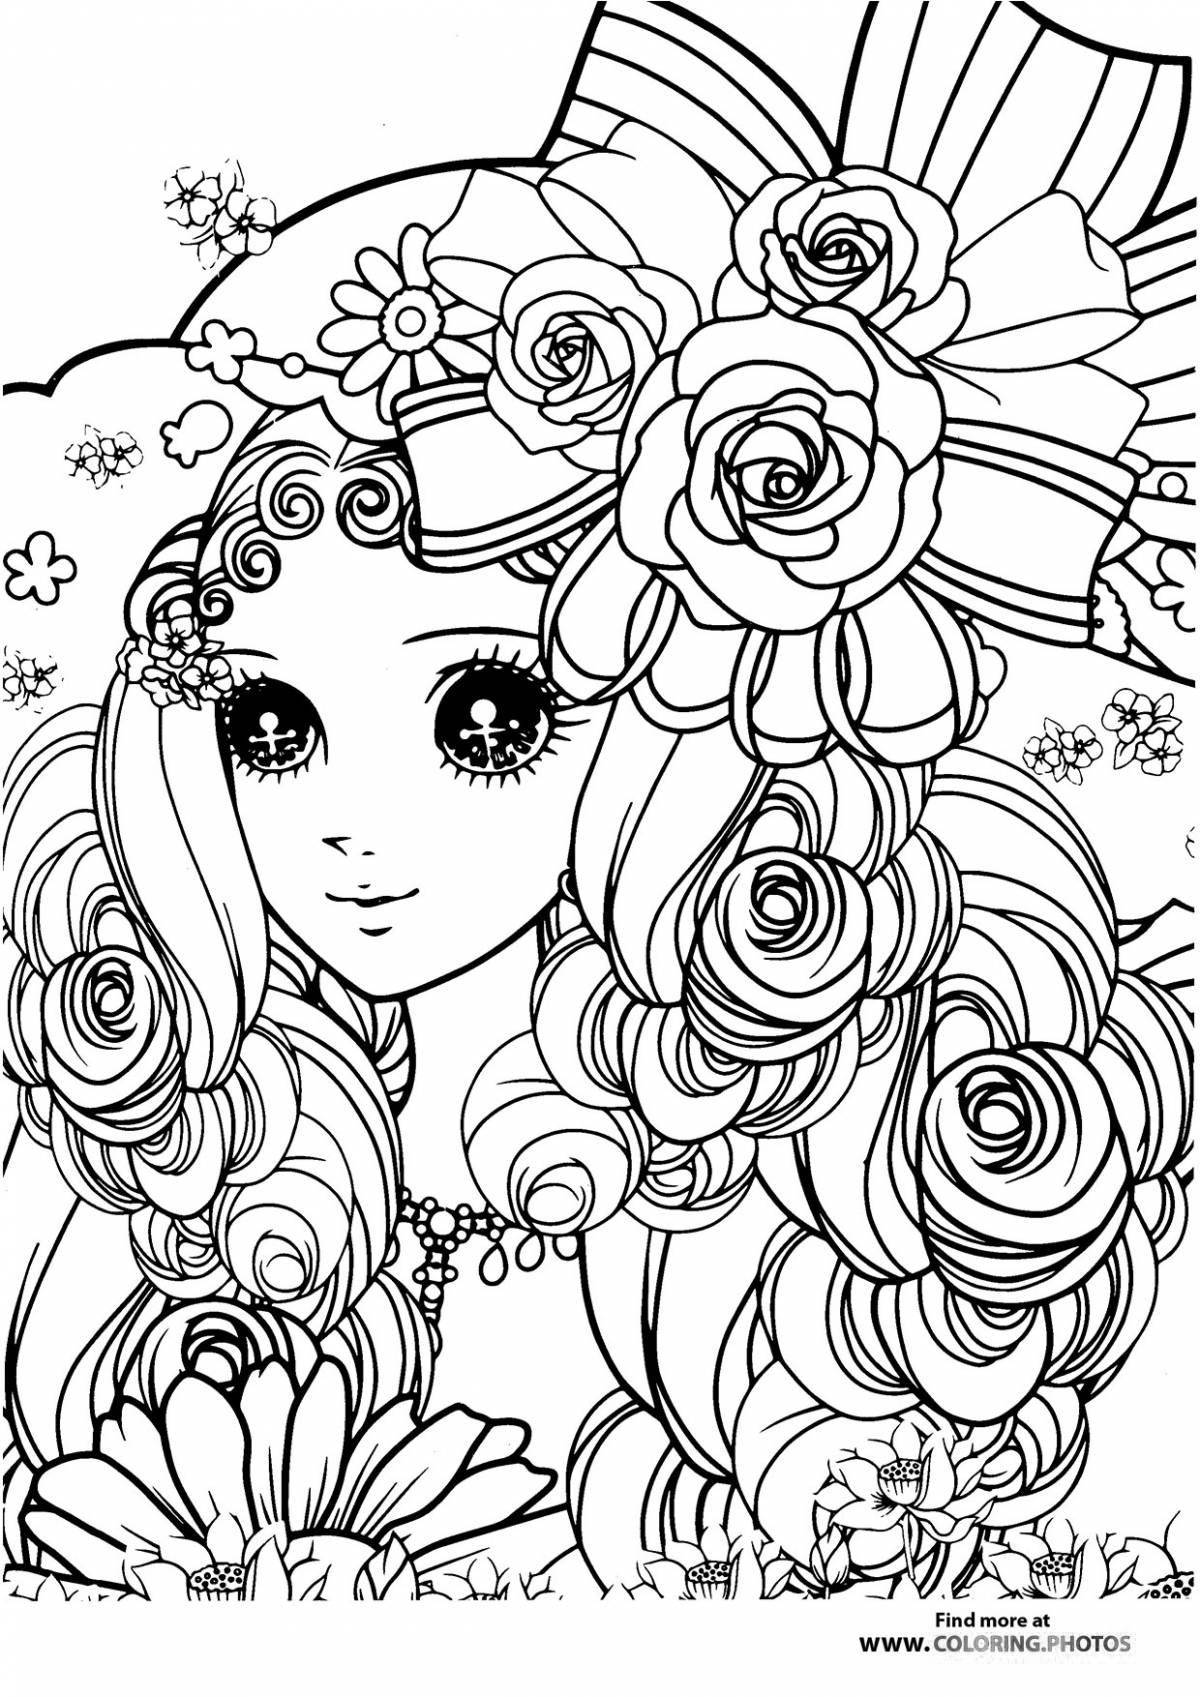 Fun interactive coloring book for girls